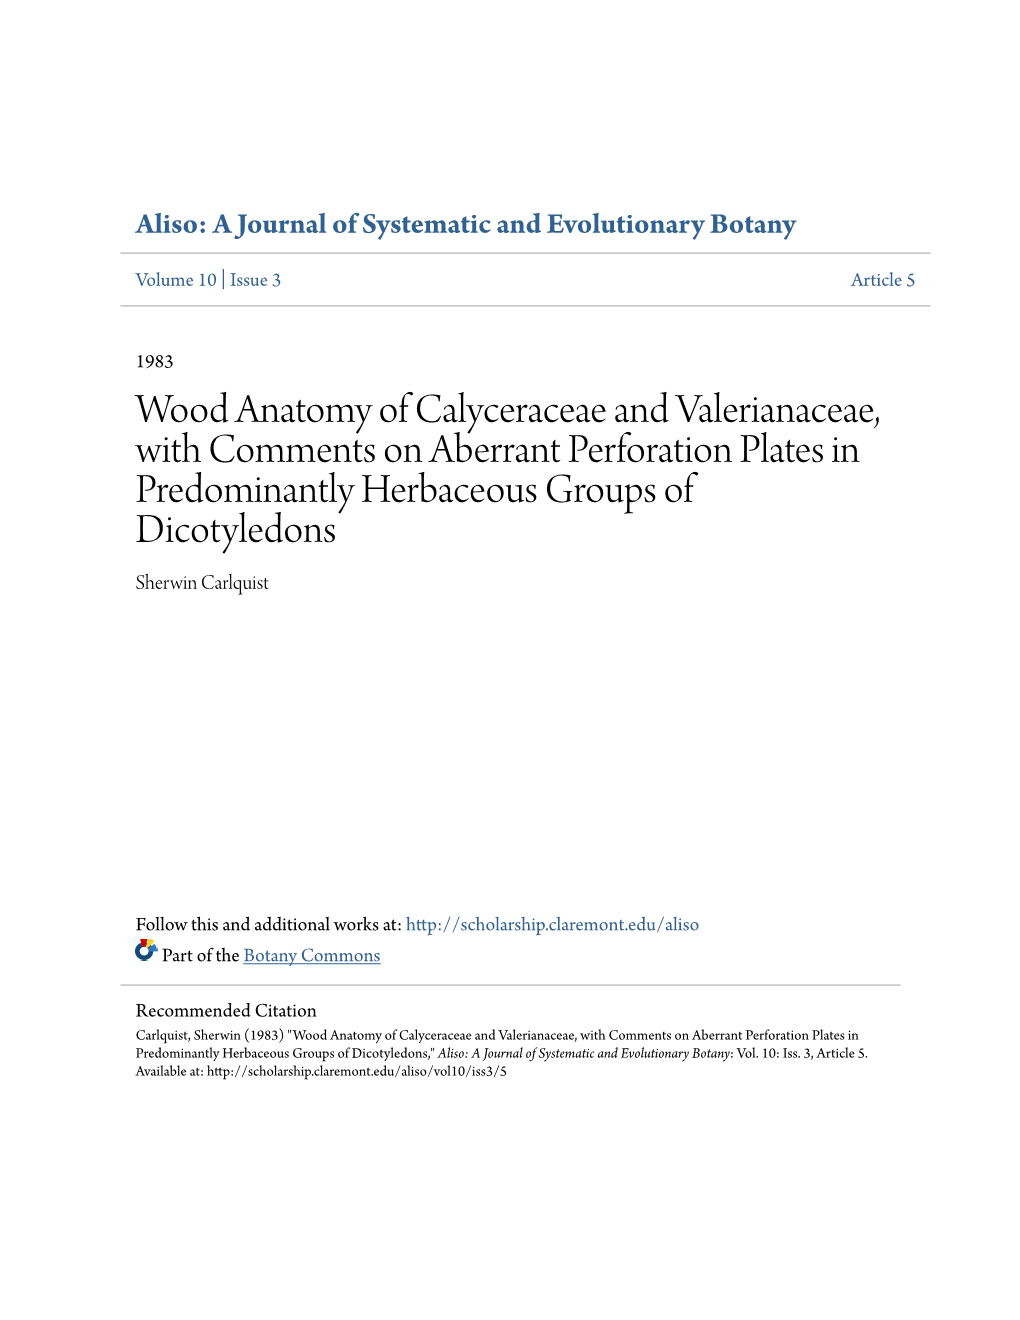 Wood Anatomy of Calyceraceae and Valerianaceae, with Comments on Aberrant Perforation Plates in Predominantly Herbaceous Groups of Dicotyledons Sherwin Carlquist